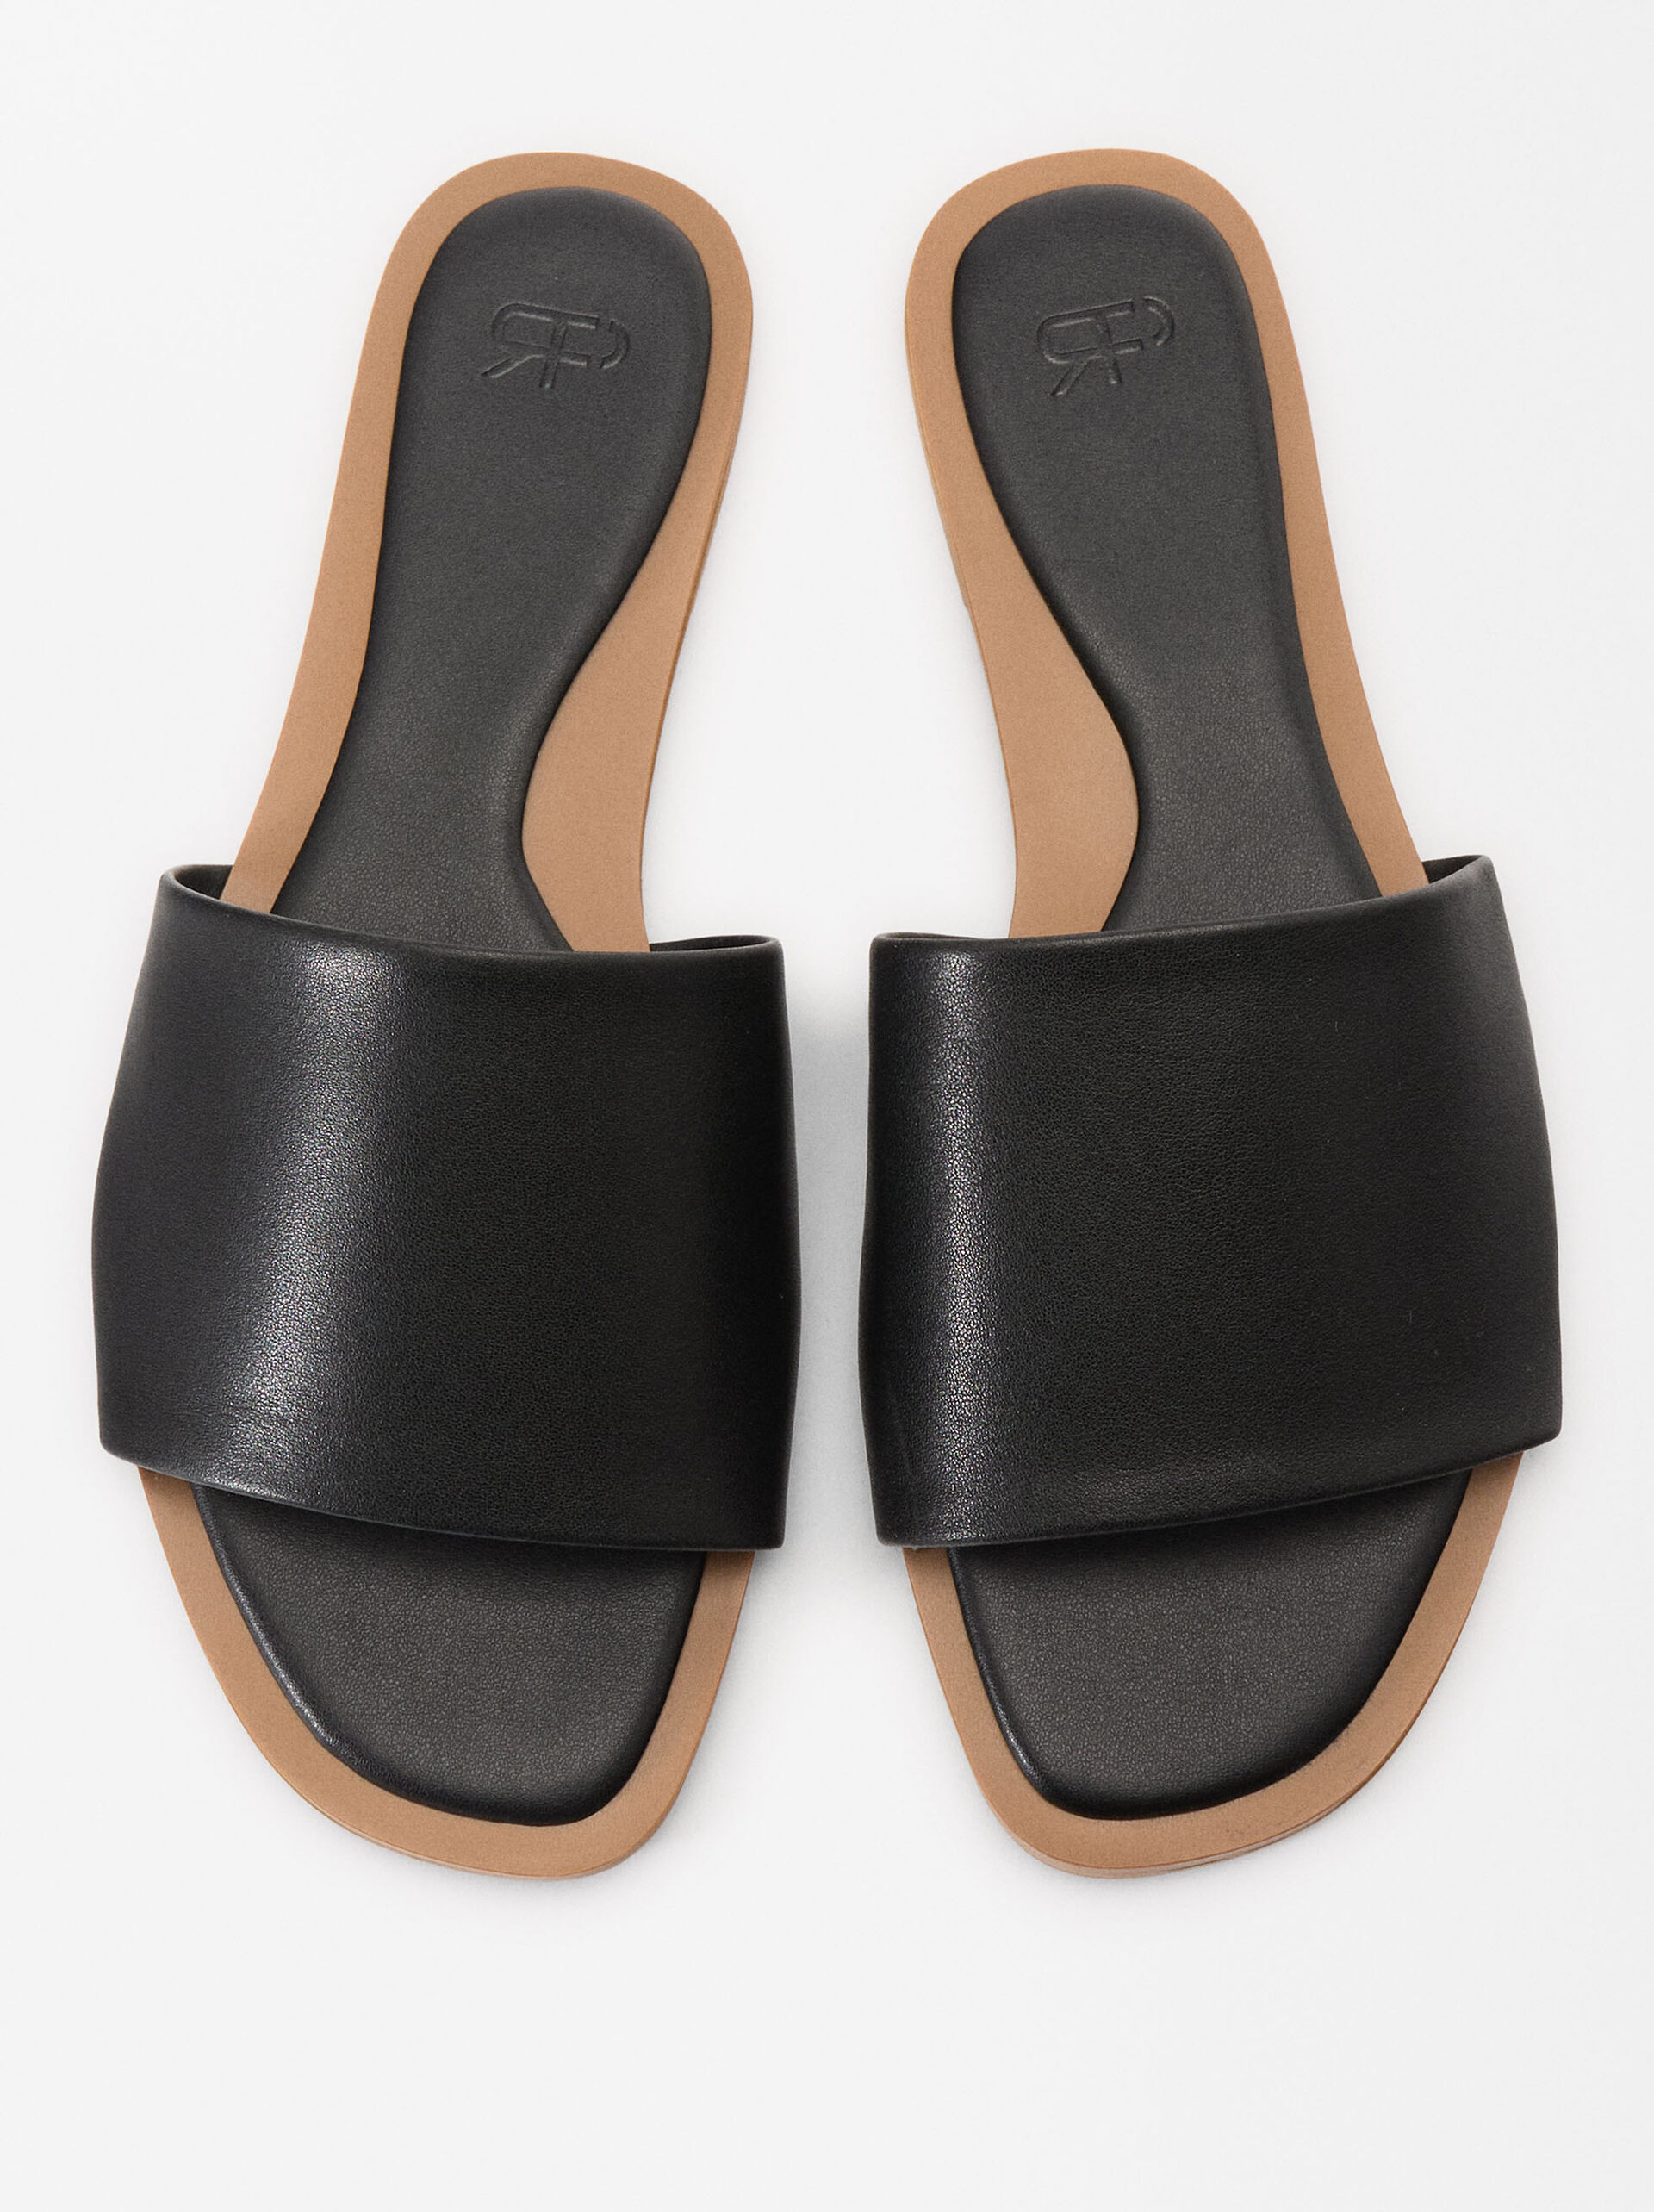 Napa Leather Sandals image number 1.0